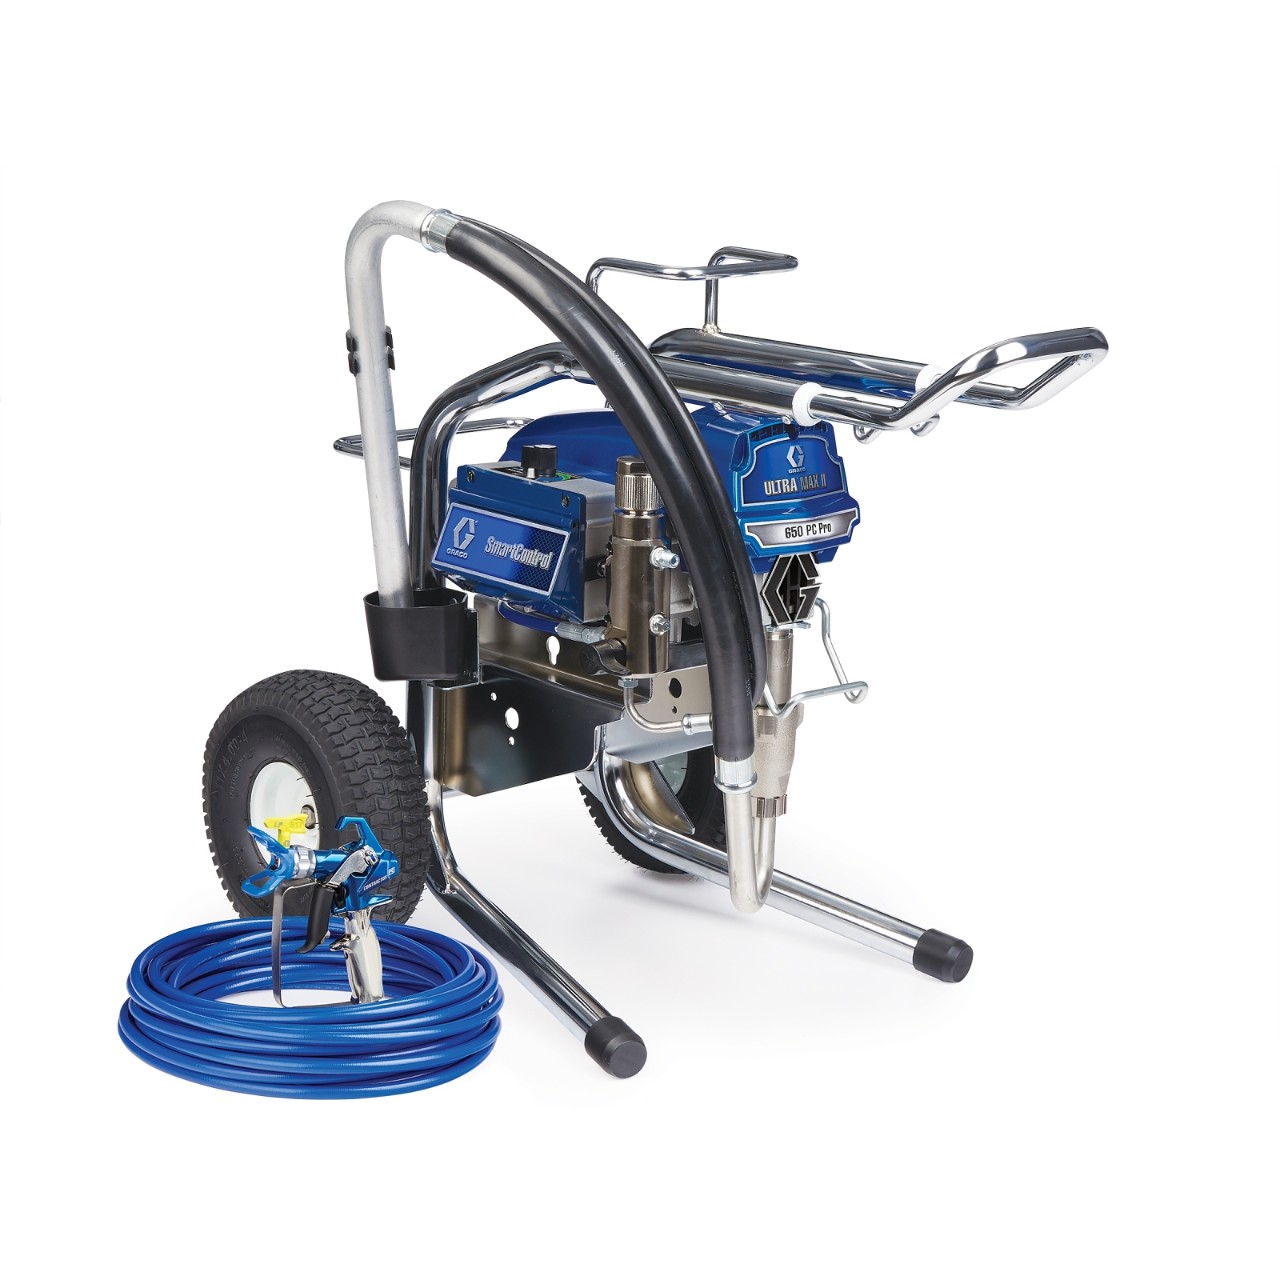 Spraywell - The *NEW* Graco Ultra Max II 650 PC Pro Electric